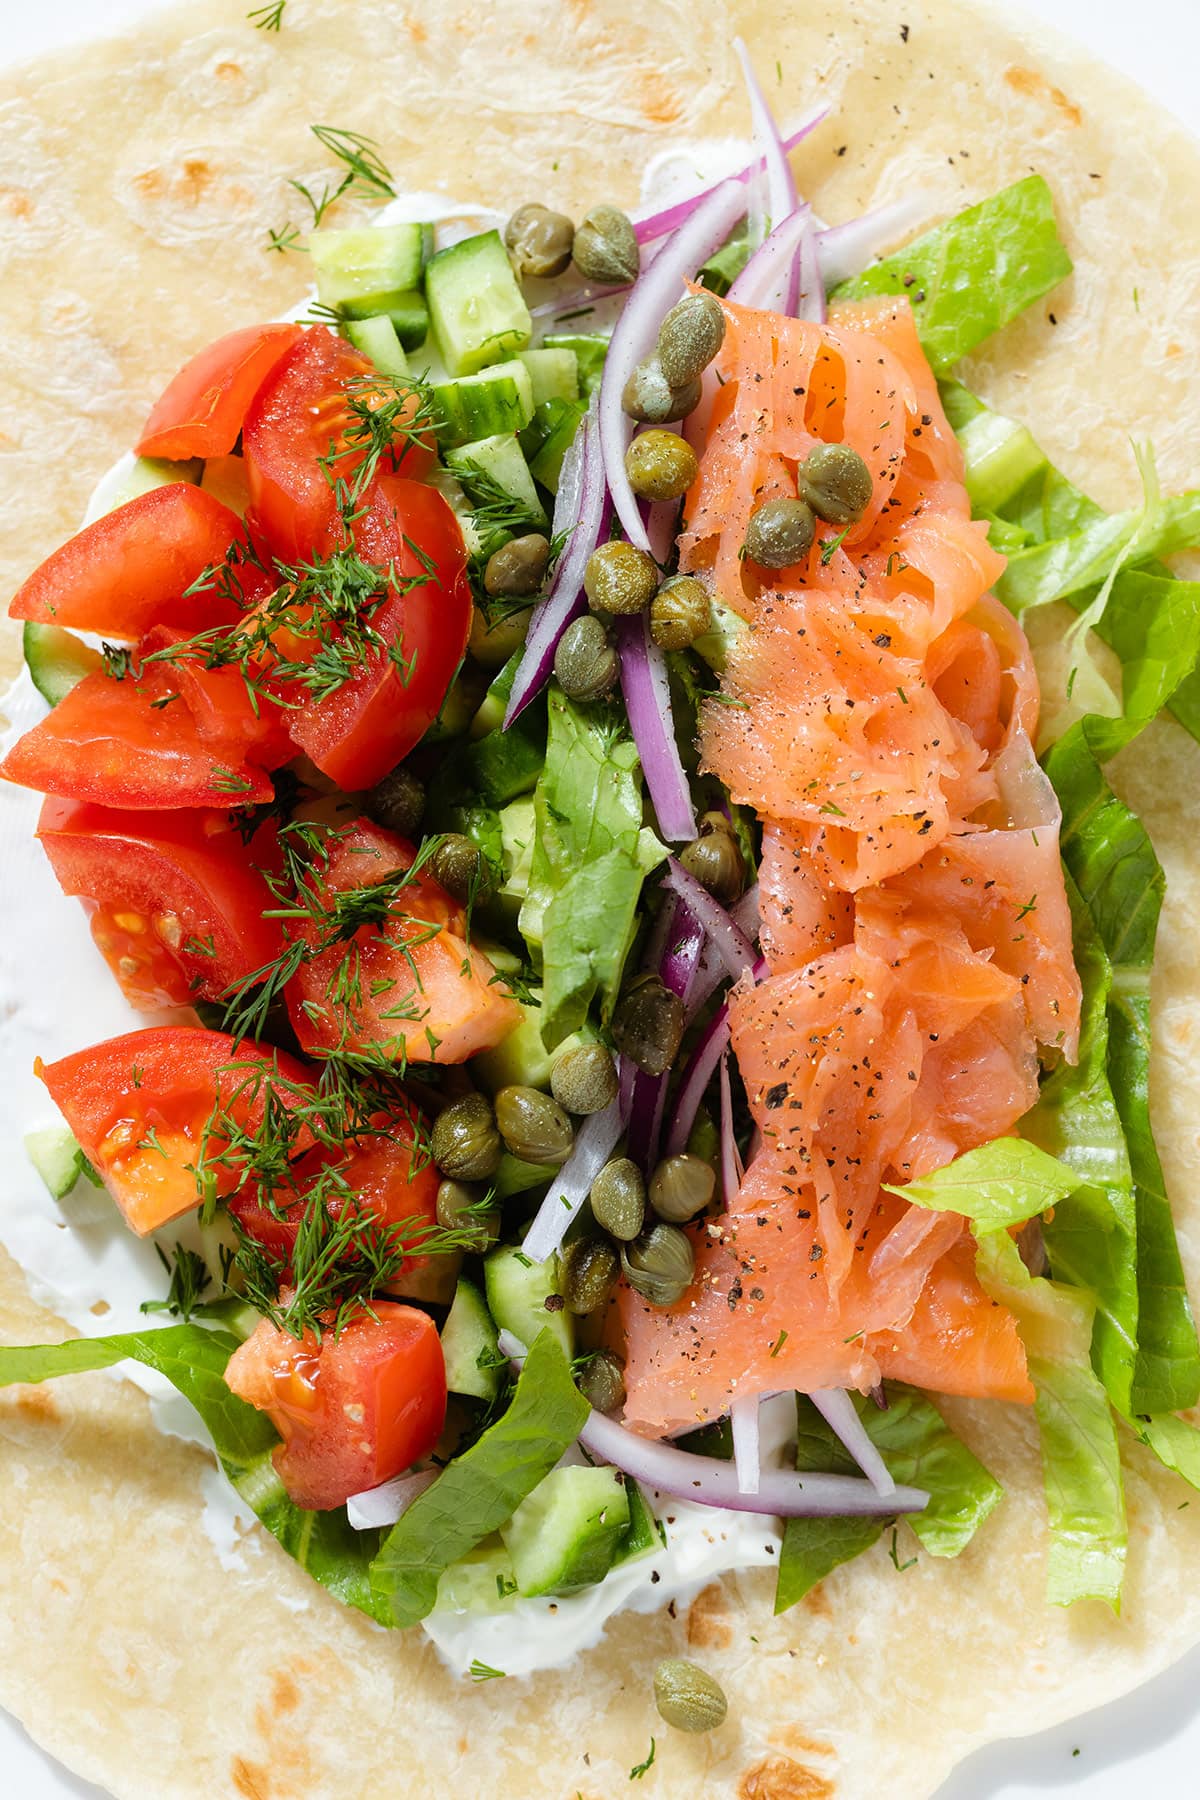 A tortilla wrap topped with chopped tomato, cucumber, smoked salmon, onion, lettuce, and cream cheese.